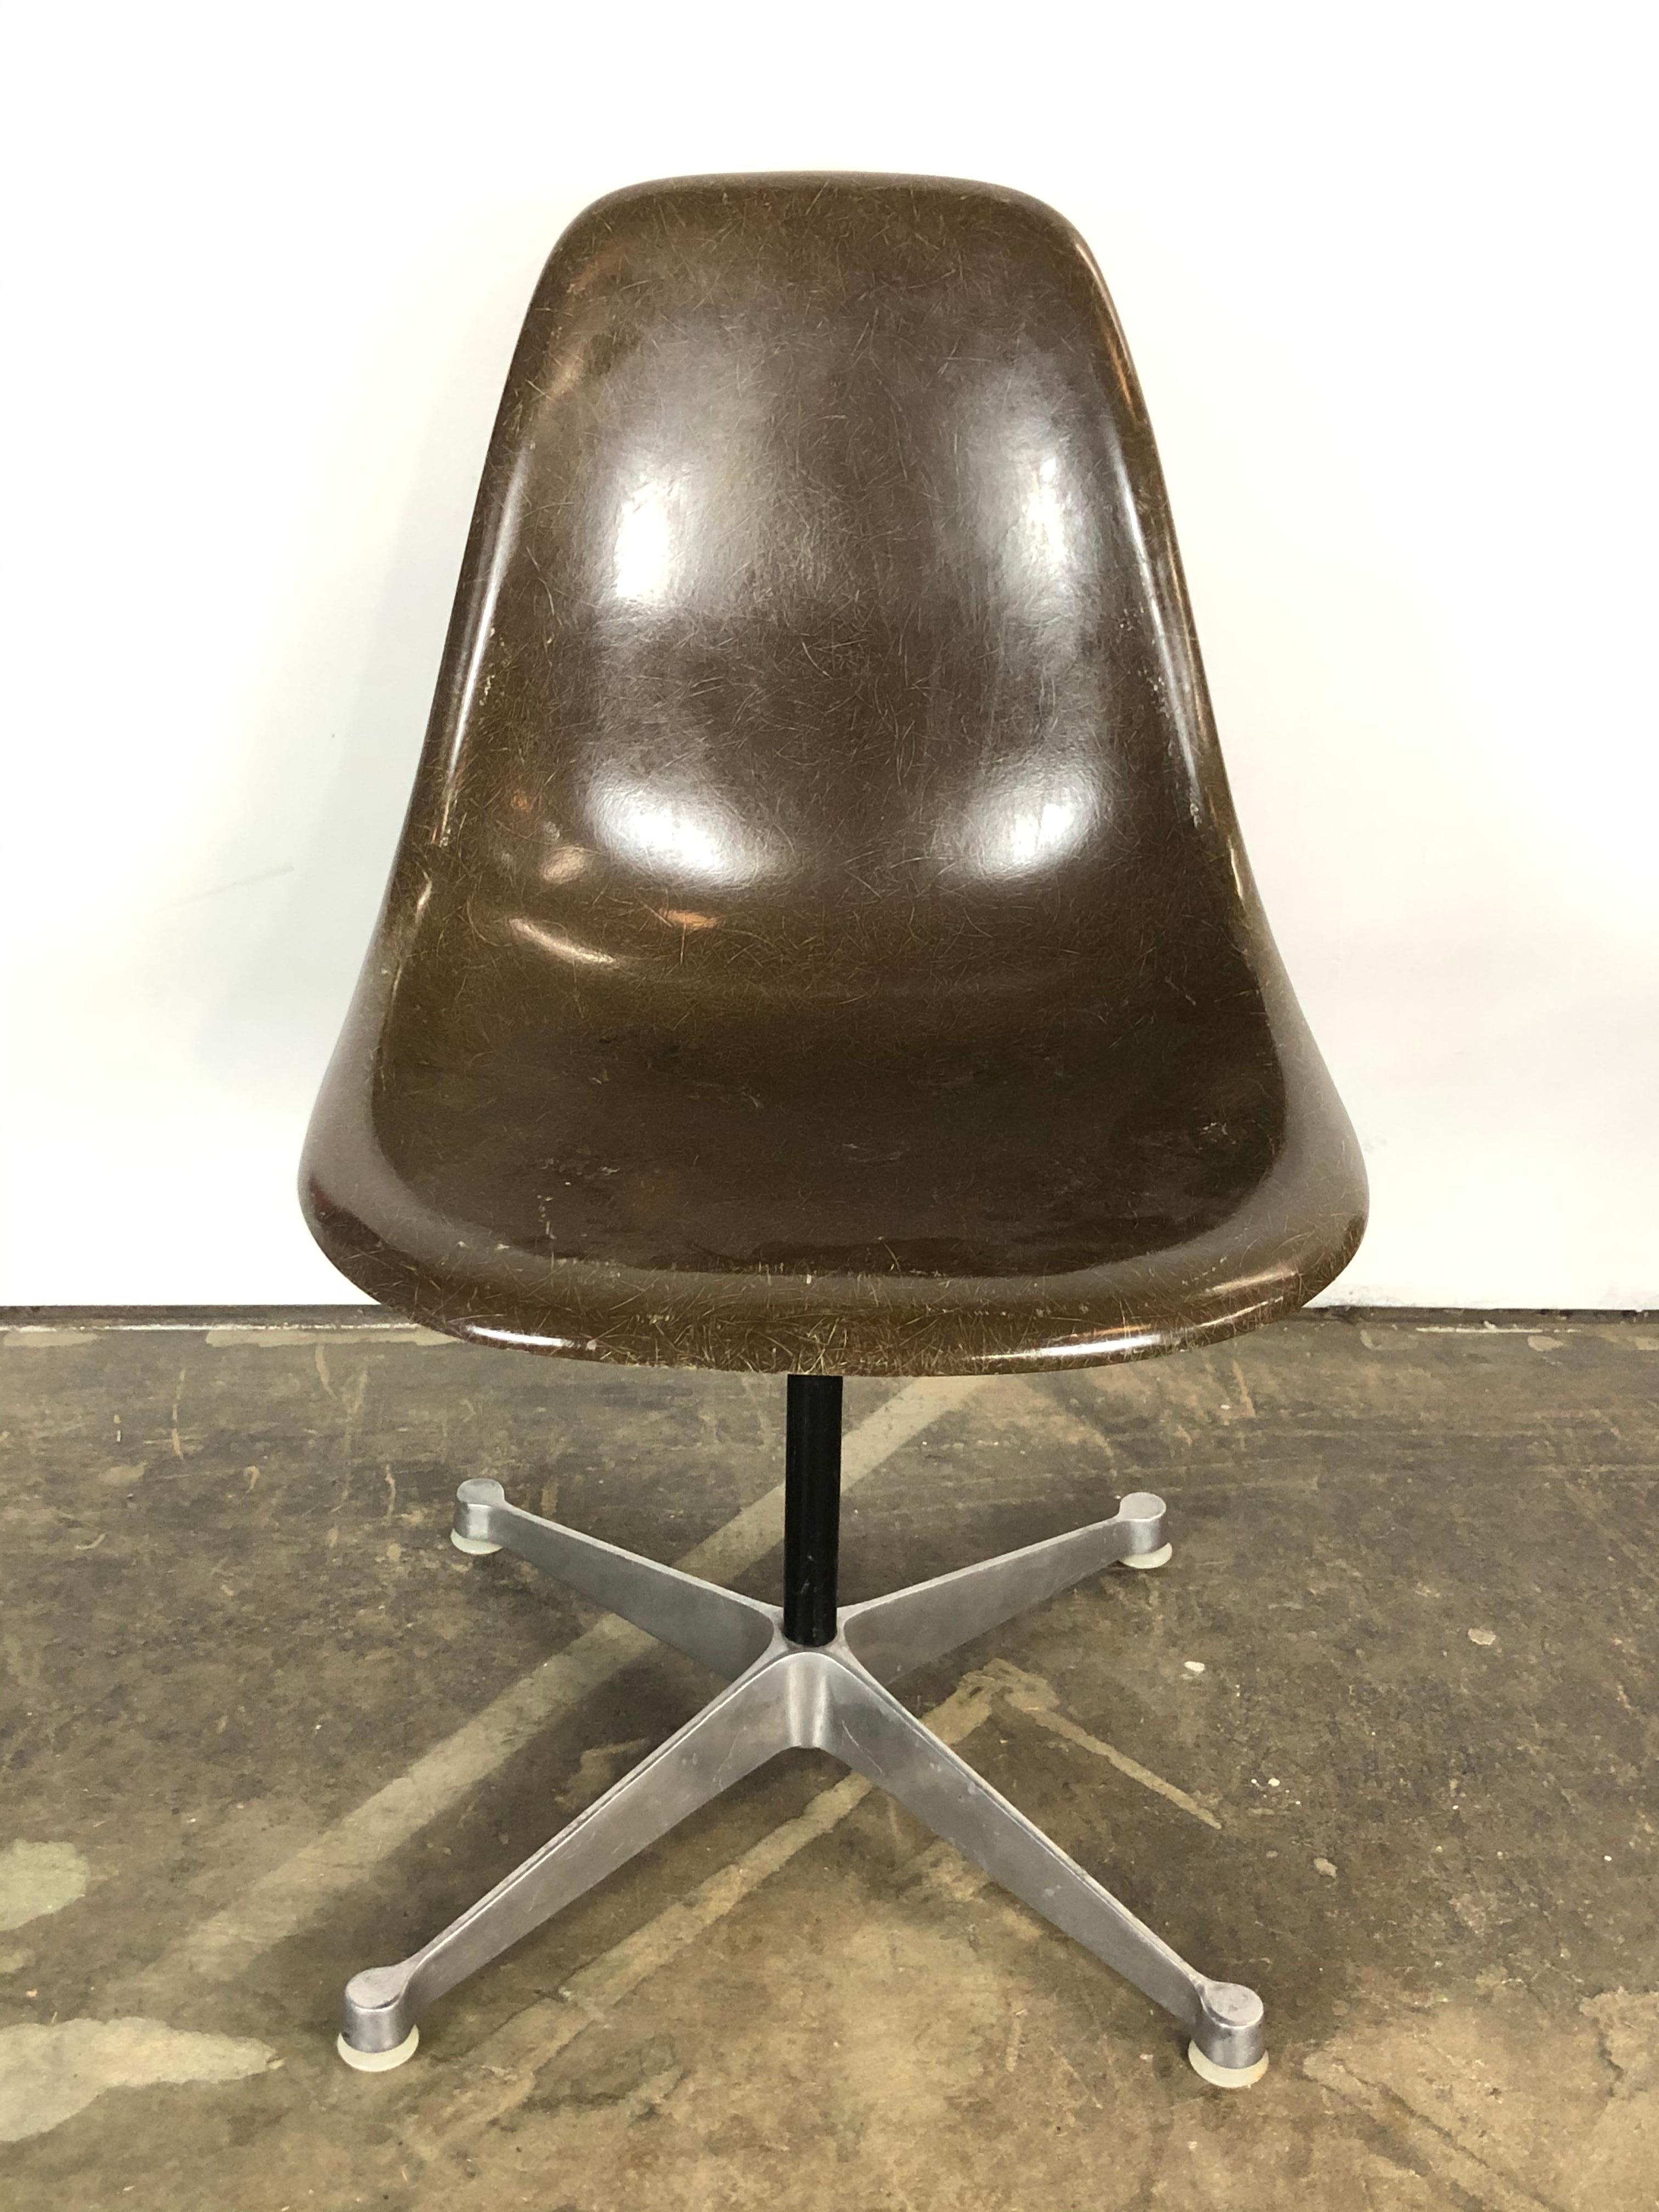 Herman Miller Eames fiberglass swivel chair. Signed under shell. Handsome darker neutral tone technically called Seal Brown. No cracks or holes to the shell. Swivels smoothly. Retains all nylon foot glides for use on multiple surfaces. Shell has a